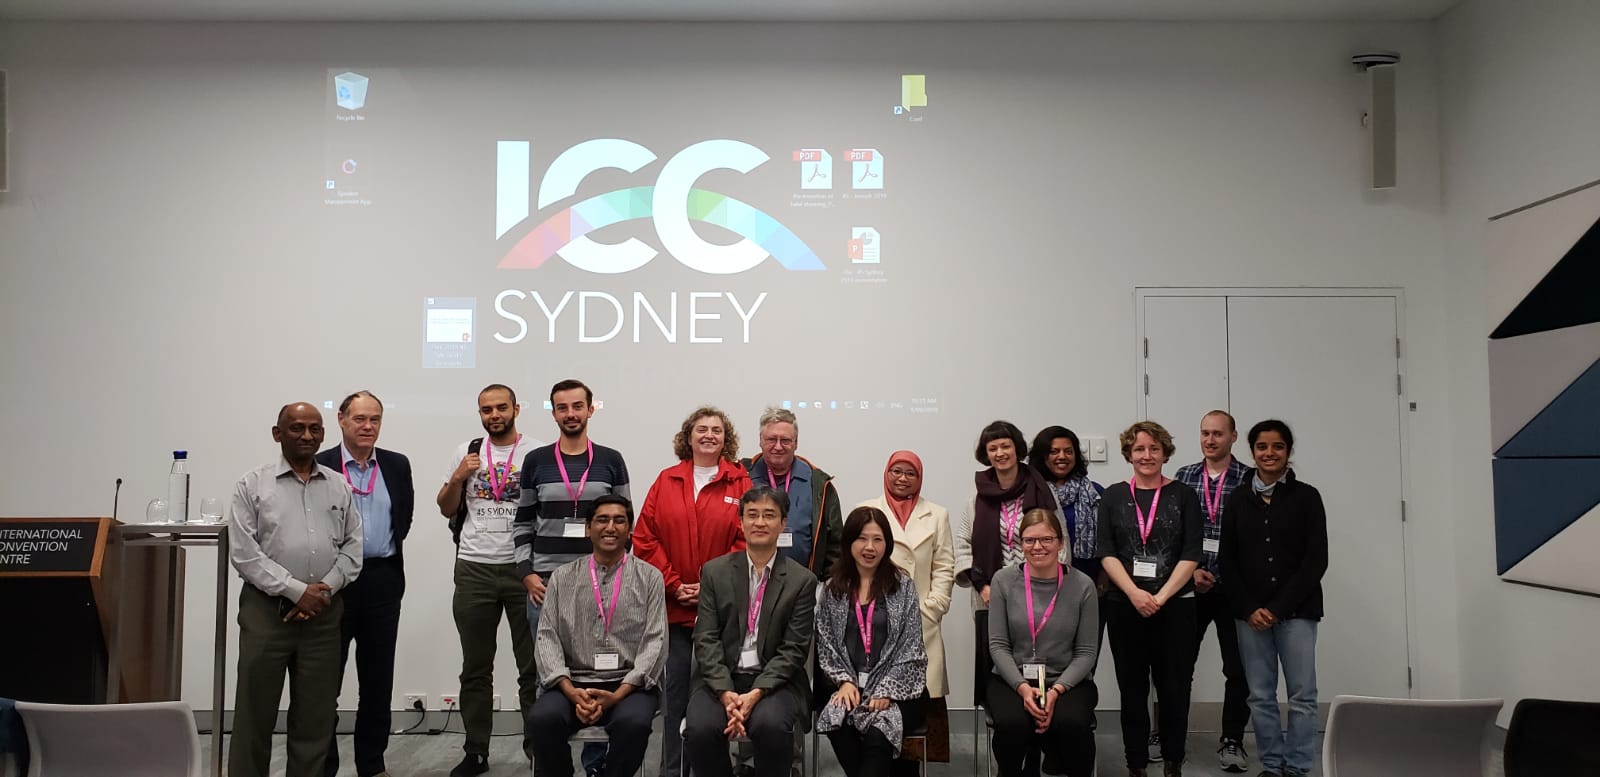 Panelists and participants at 4S 2018